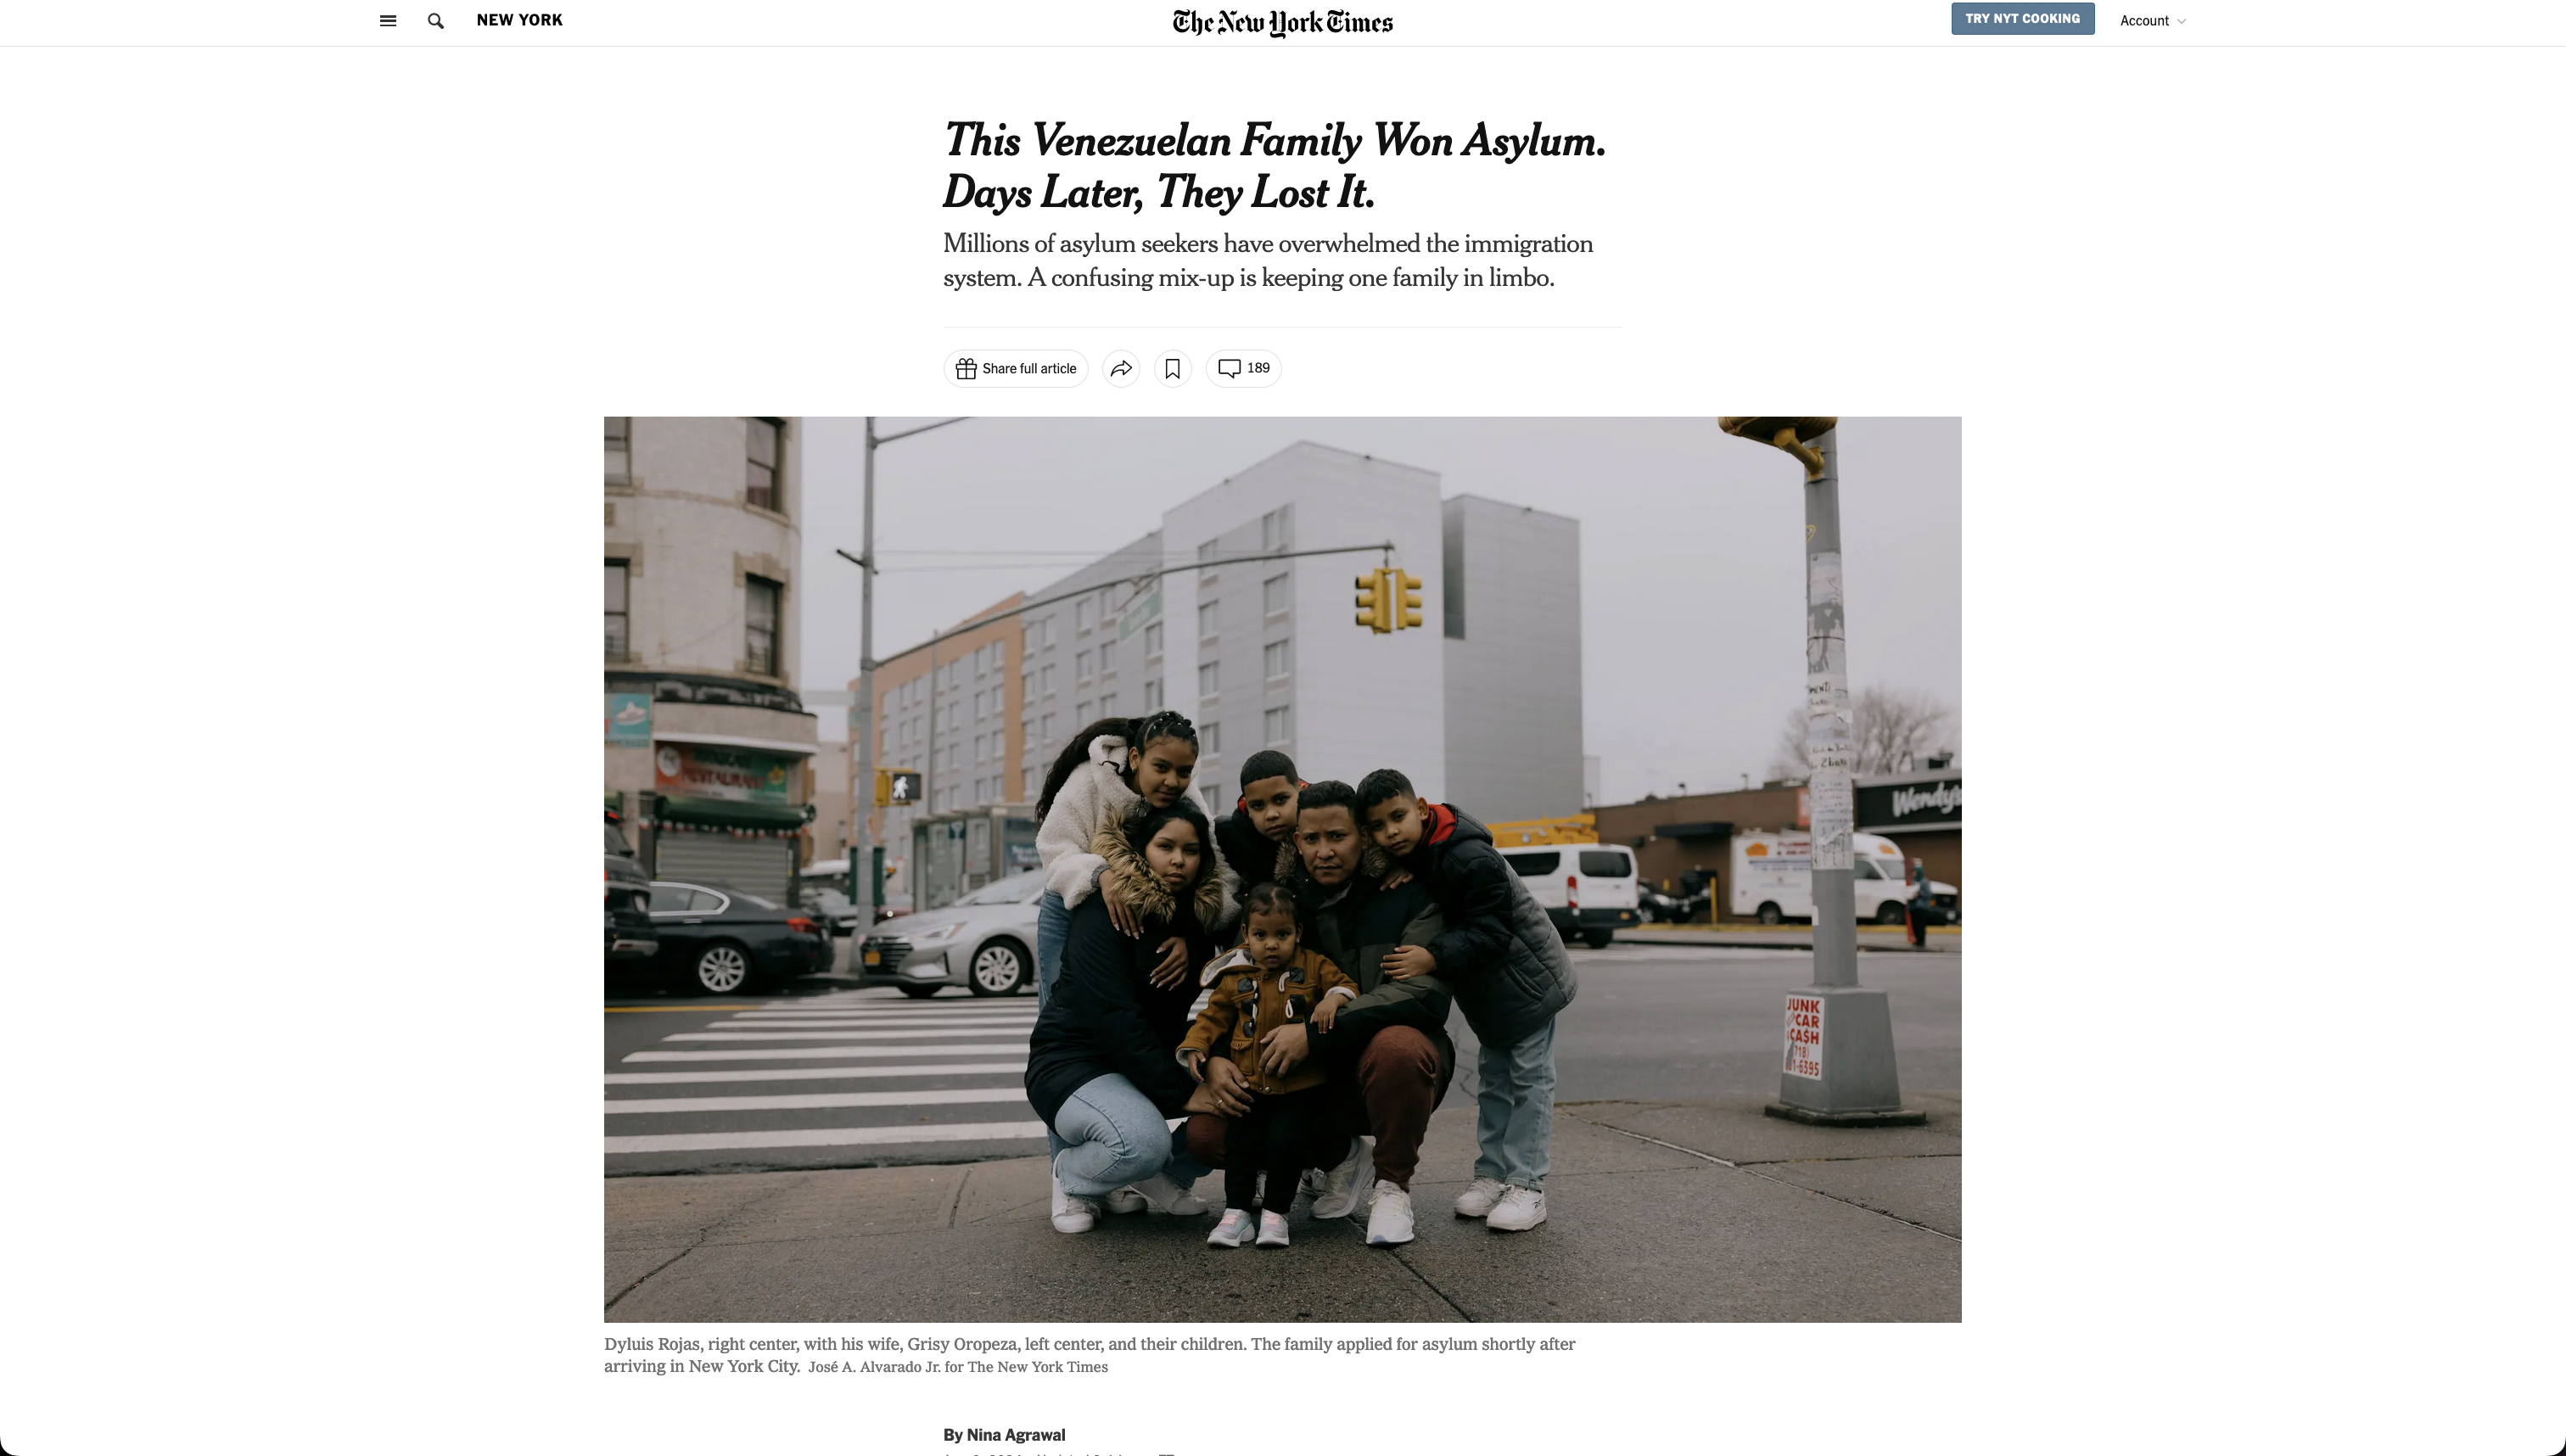 for The New York Times: This Venezuelan Family Won Asylum. Days Later, They Lost It.